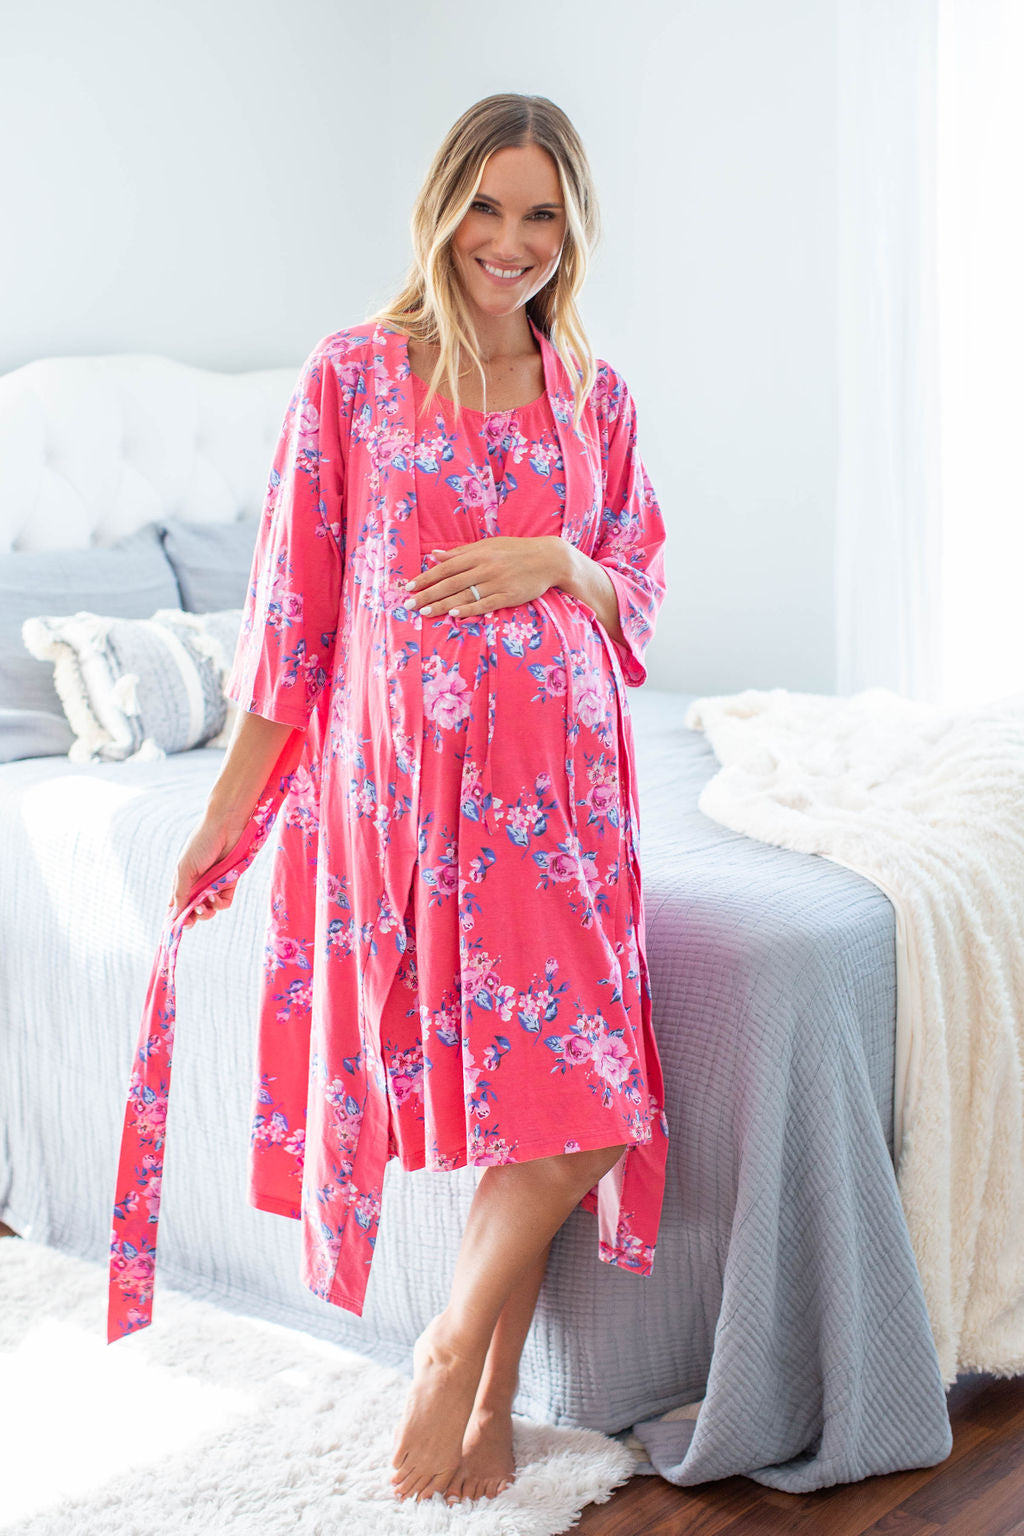 Maternity Hospital Nursing Robe & Labor Delivery Gown Set – Baby Be Mine